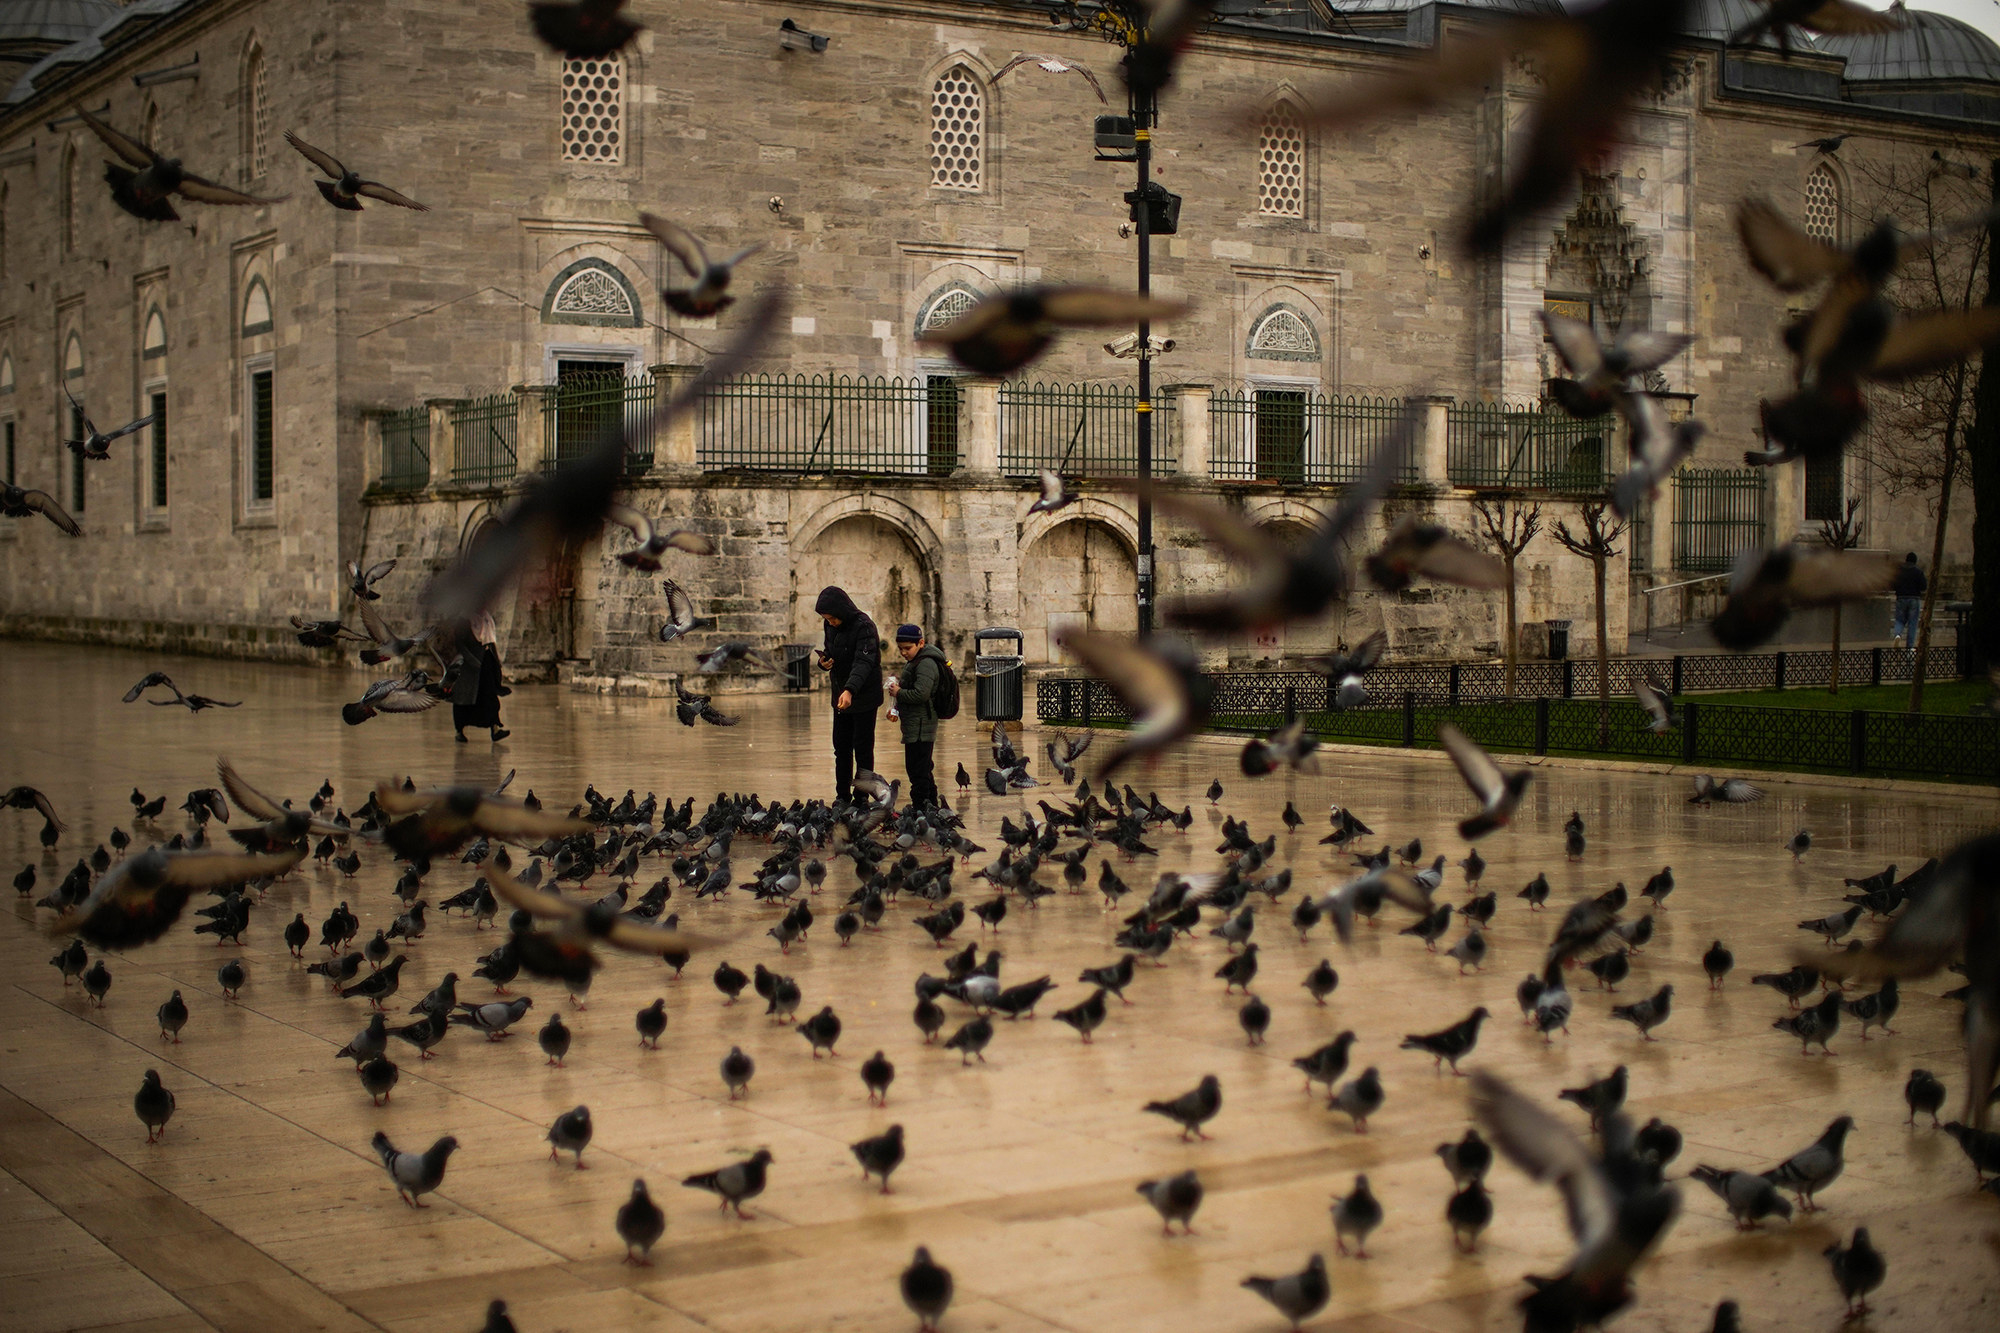 Outside a tan mosque, two people stand surrounded by a flock of black pigeons